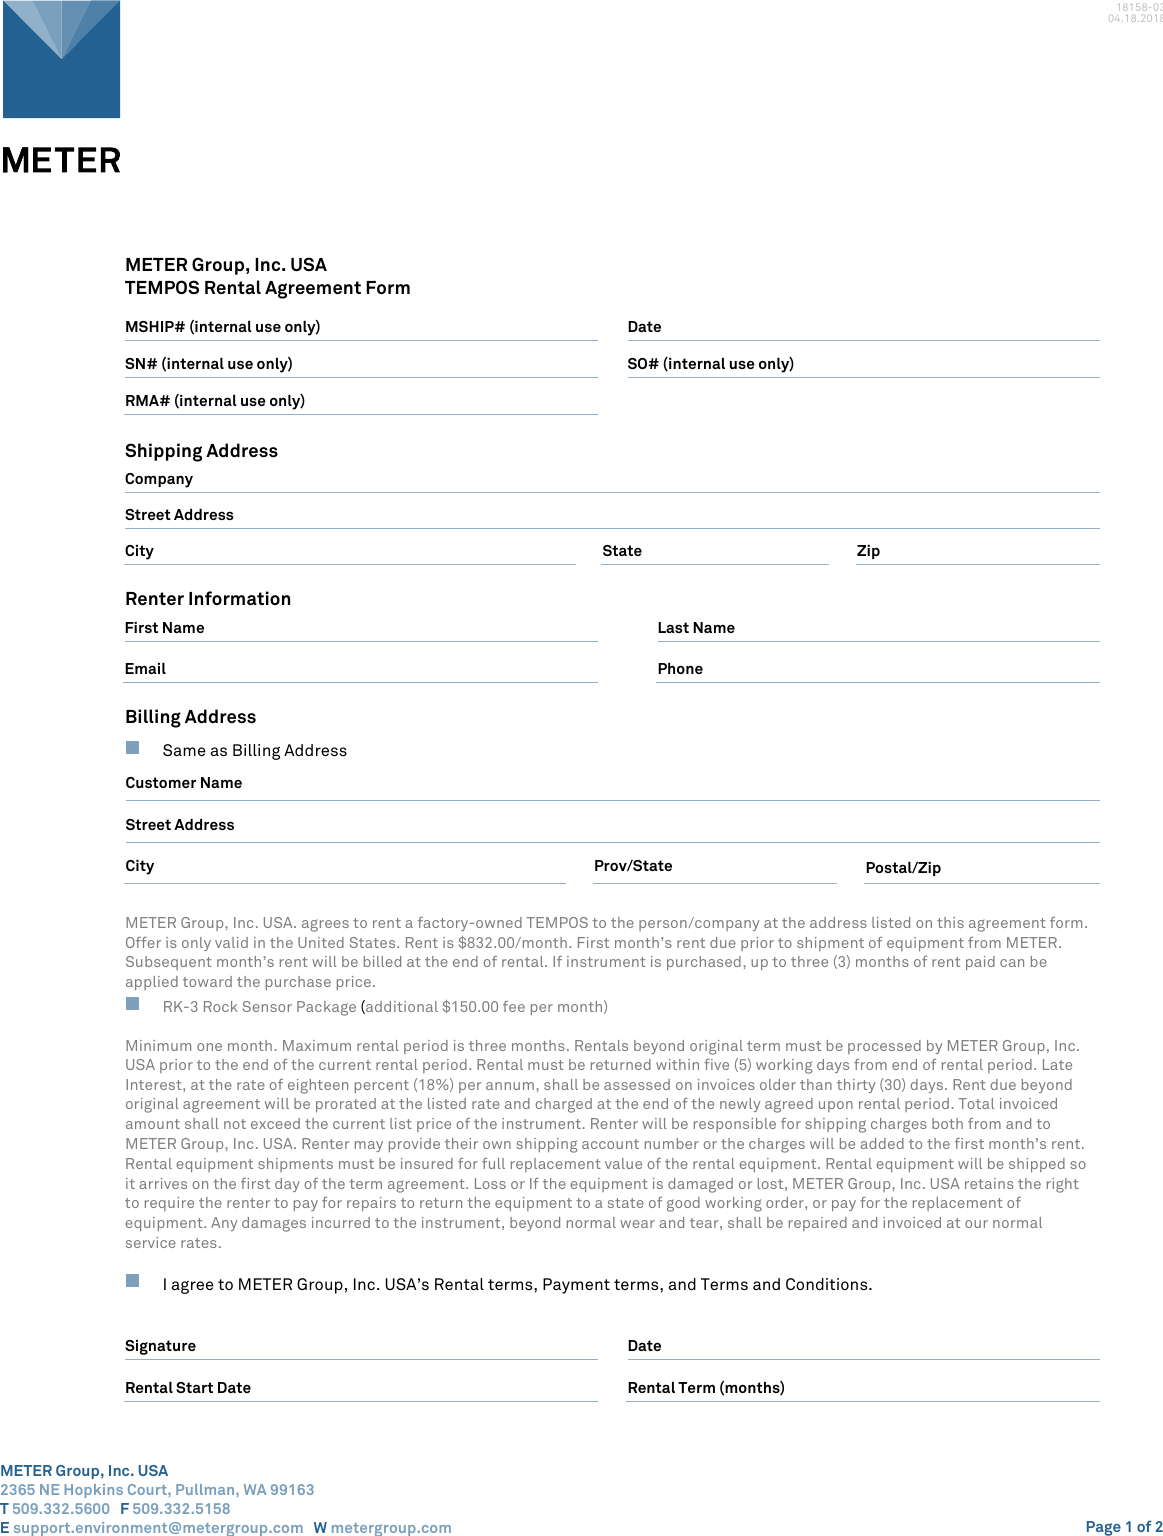 Page 1 of 2 - 18158-02 THERMOLINK Rental Agreementx 18158 TEMPOS Agreement